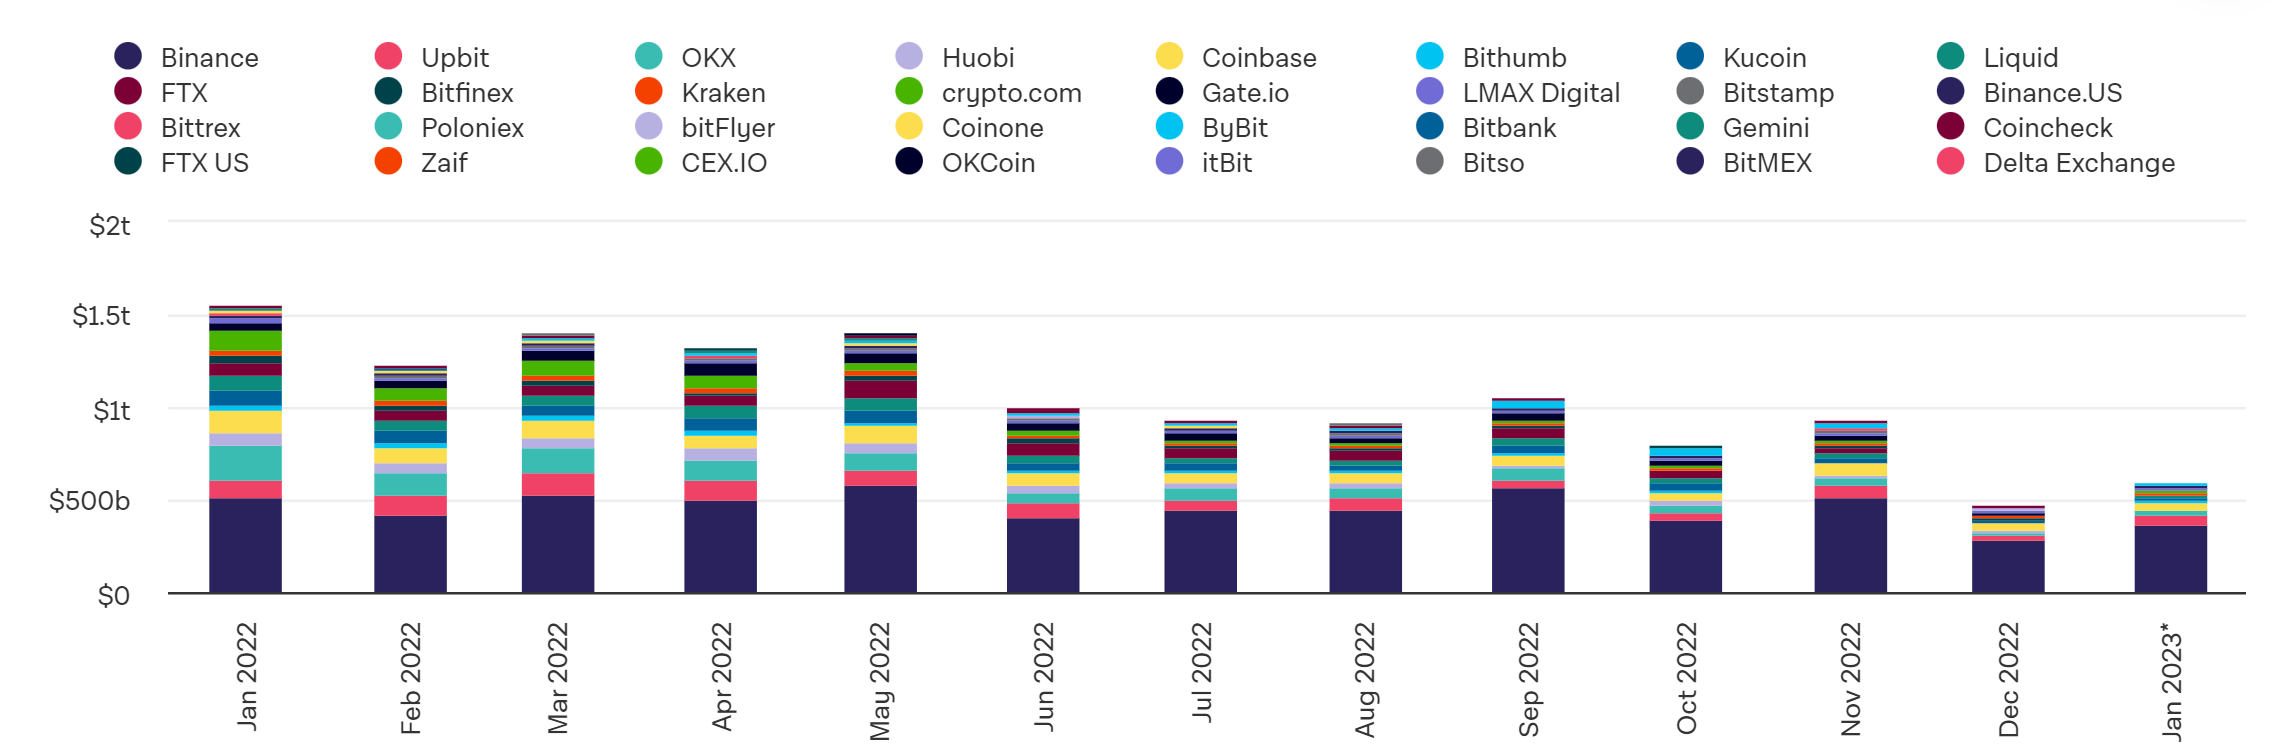 Cryptocurrency Monthly Exchange Volume As of January 24, 2023. 